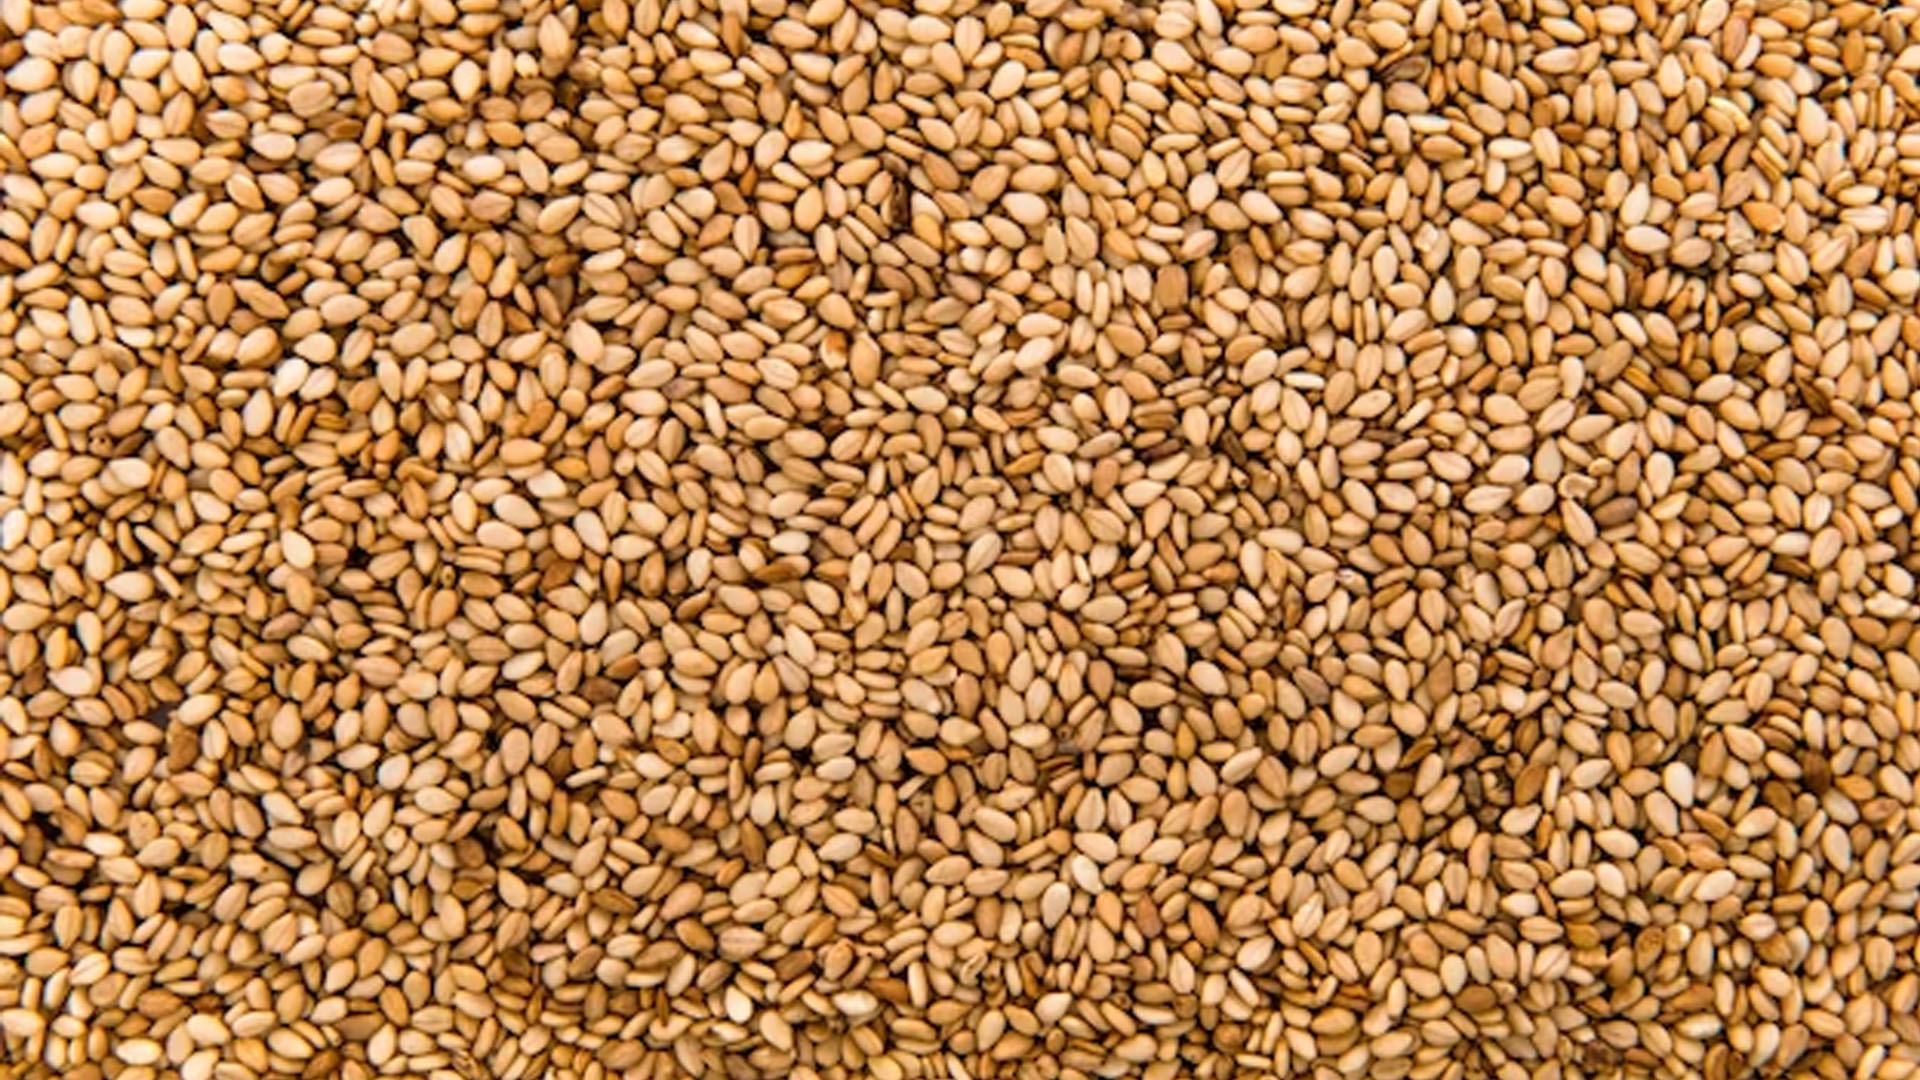 What Are The Health Benefits of Eating Sesame Seeds?